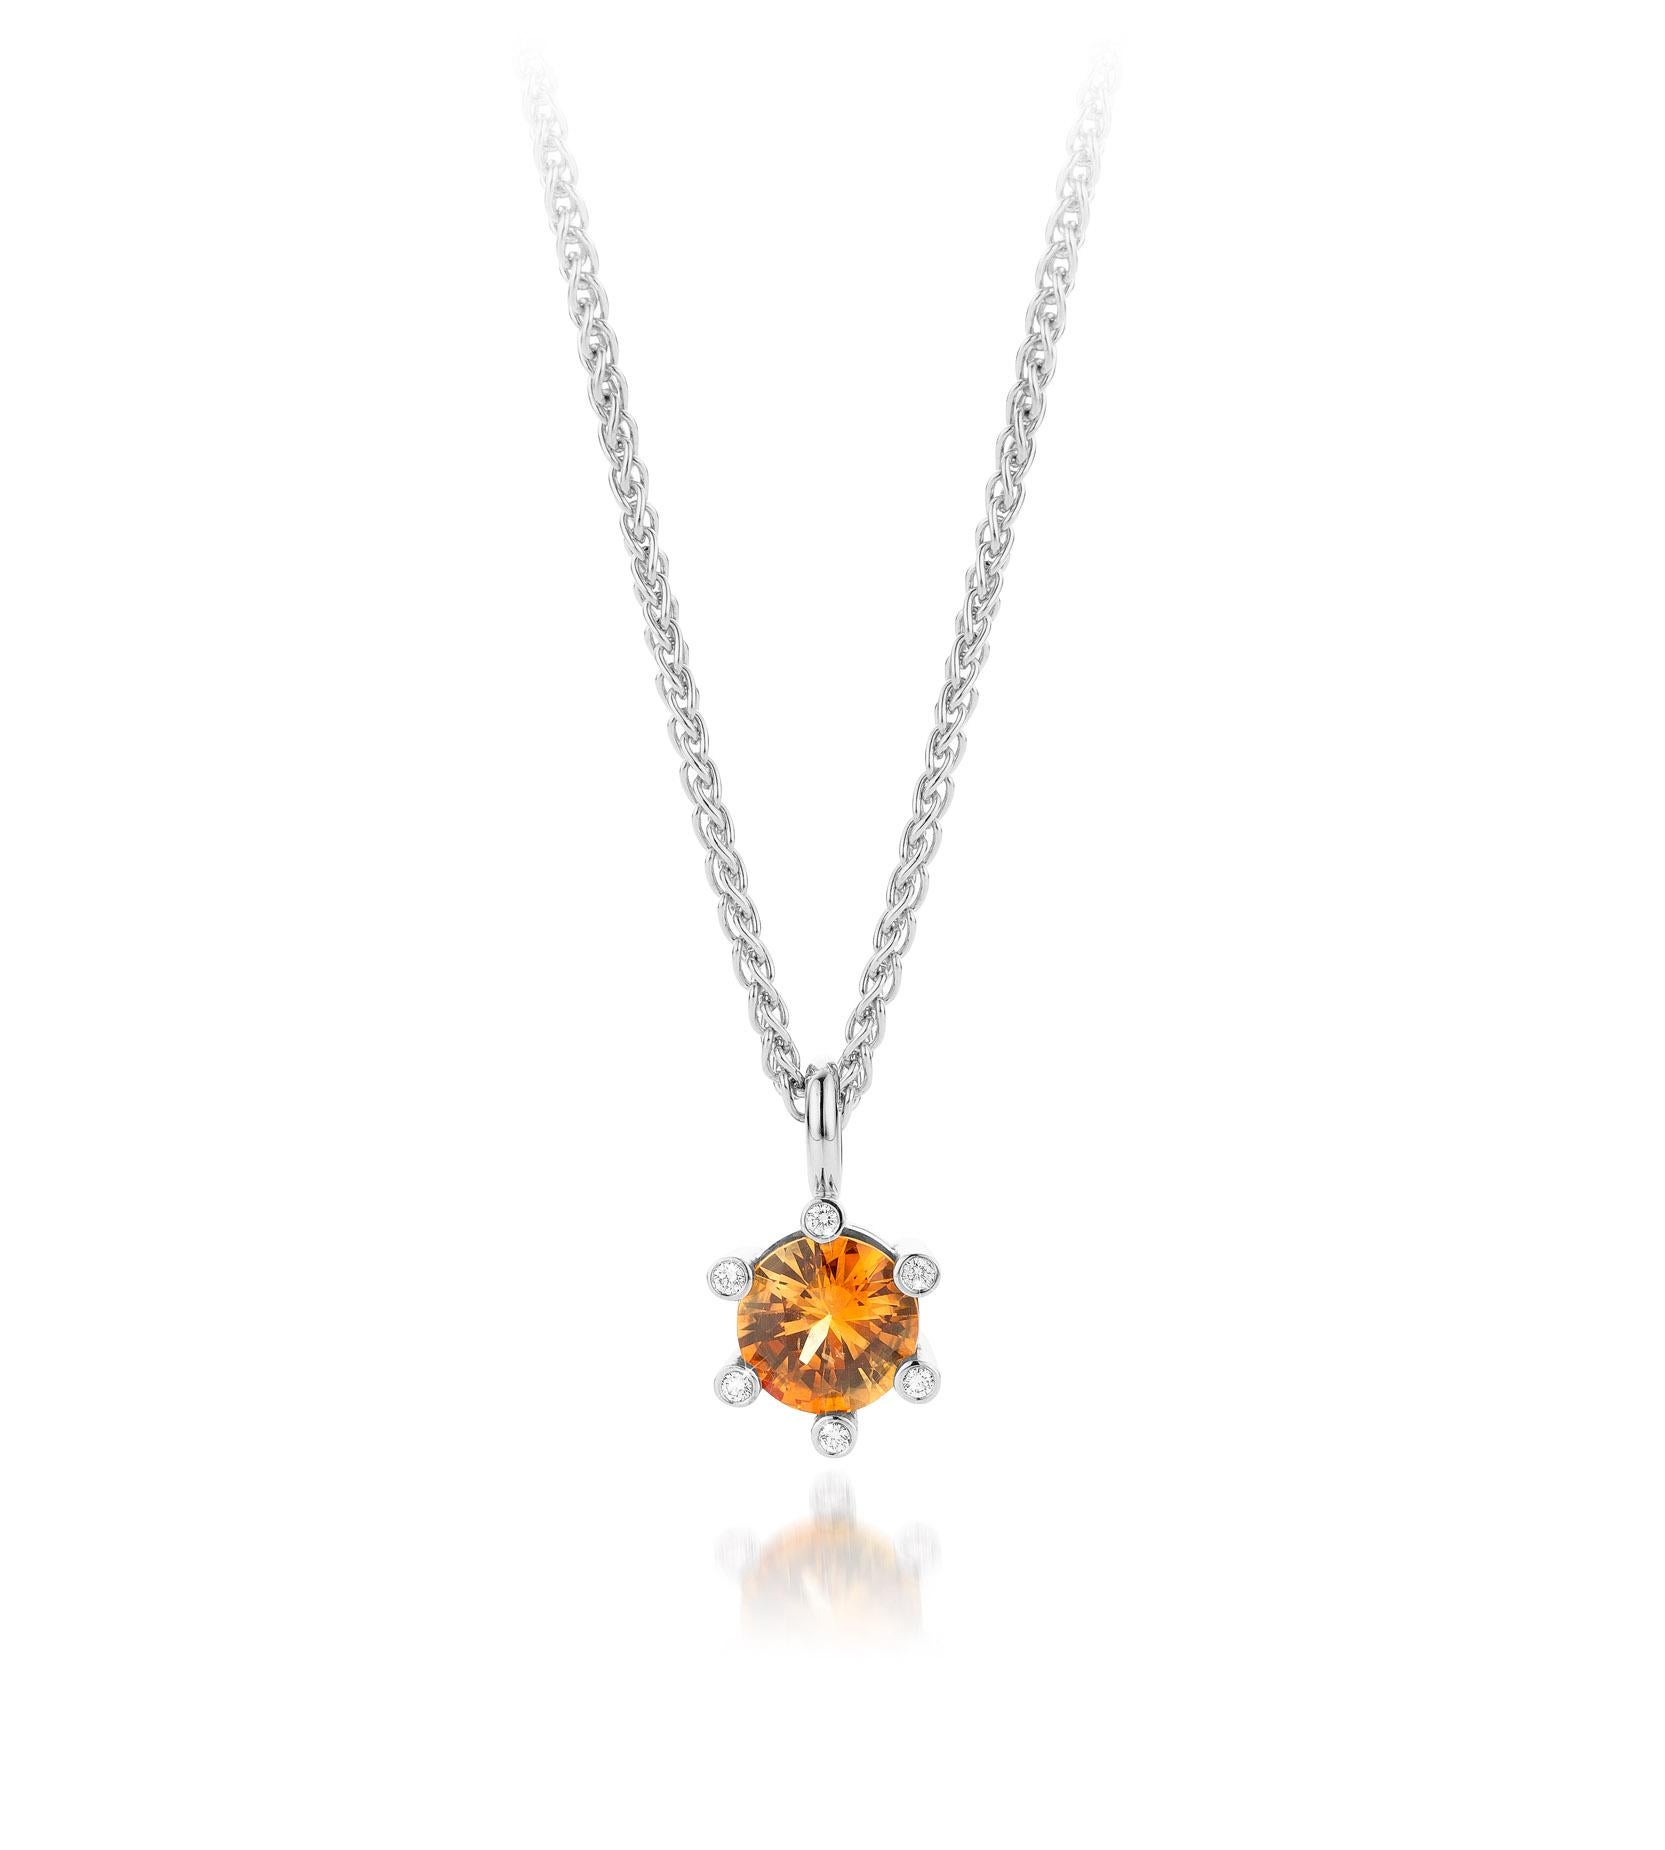 Contemporary Cober Jewellery 18 Carat White Gold with Orange Sapphire and 6 Diamonds Pendant For Sale